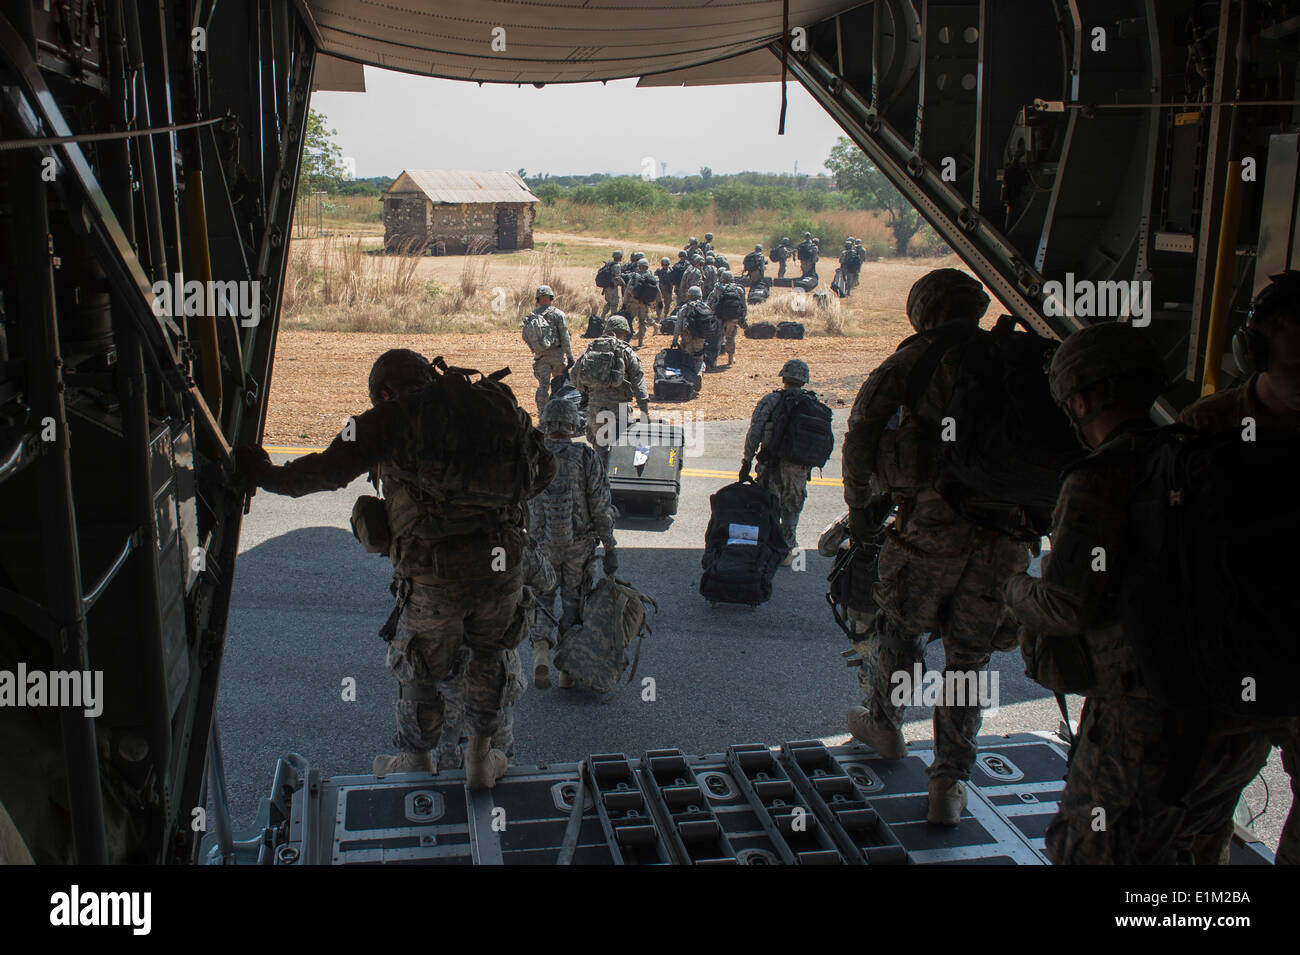 U.S. Soldiers, along with East Africa Response Force soldiers, depart a U.S. Air Force C-130 Hercules aircraft in Juba, Sudan, Stock Photo